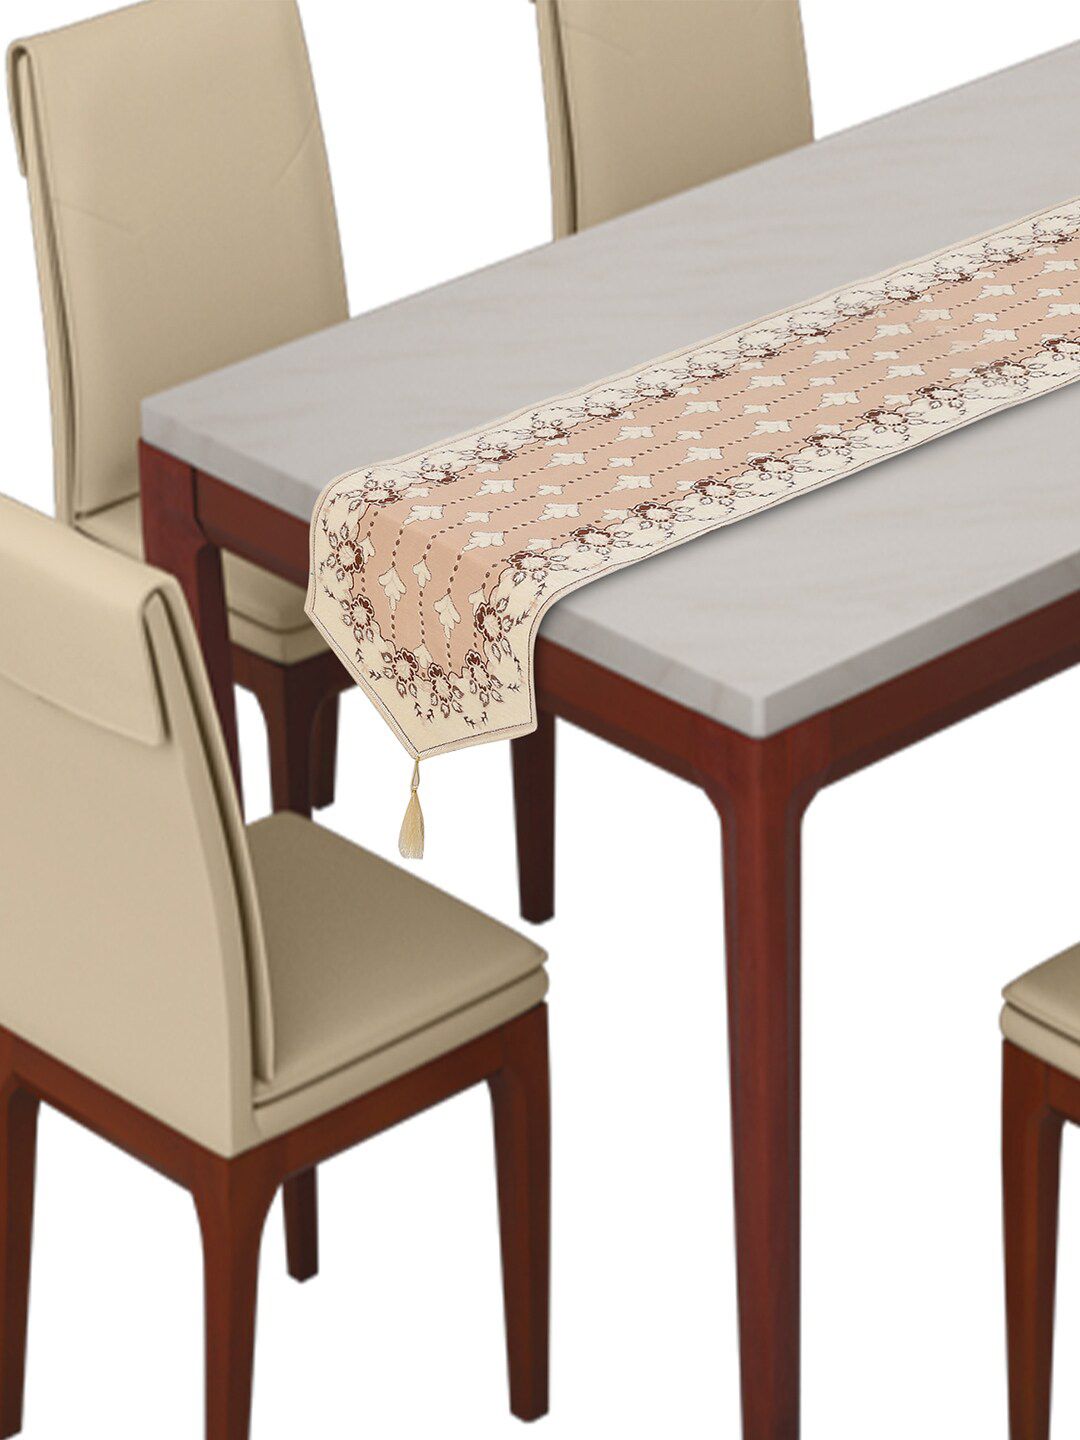 Kuber Industries Cream Floral Printed Velvet Dining Table Runners Price in India